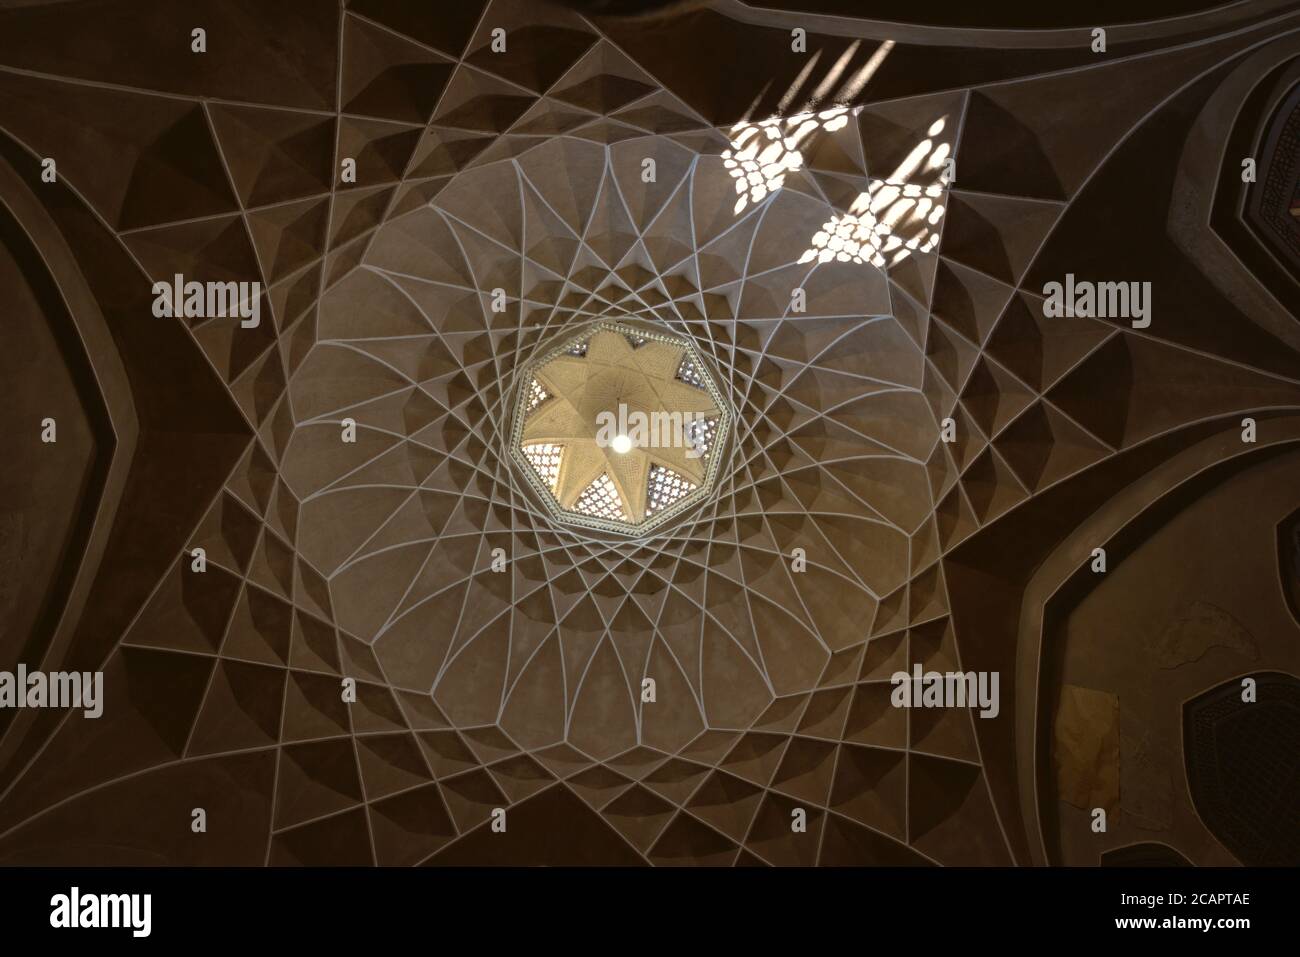 Ceiling and Iranian architecture inside summer pavilion of landmark Persian garden in Yazd, Iran Stock Photo